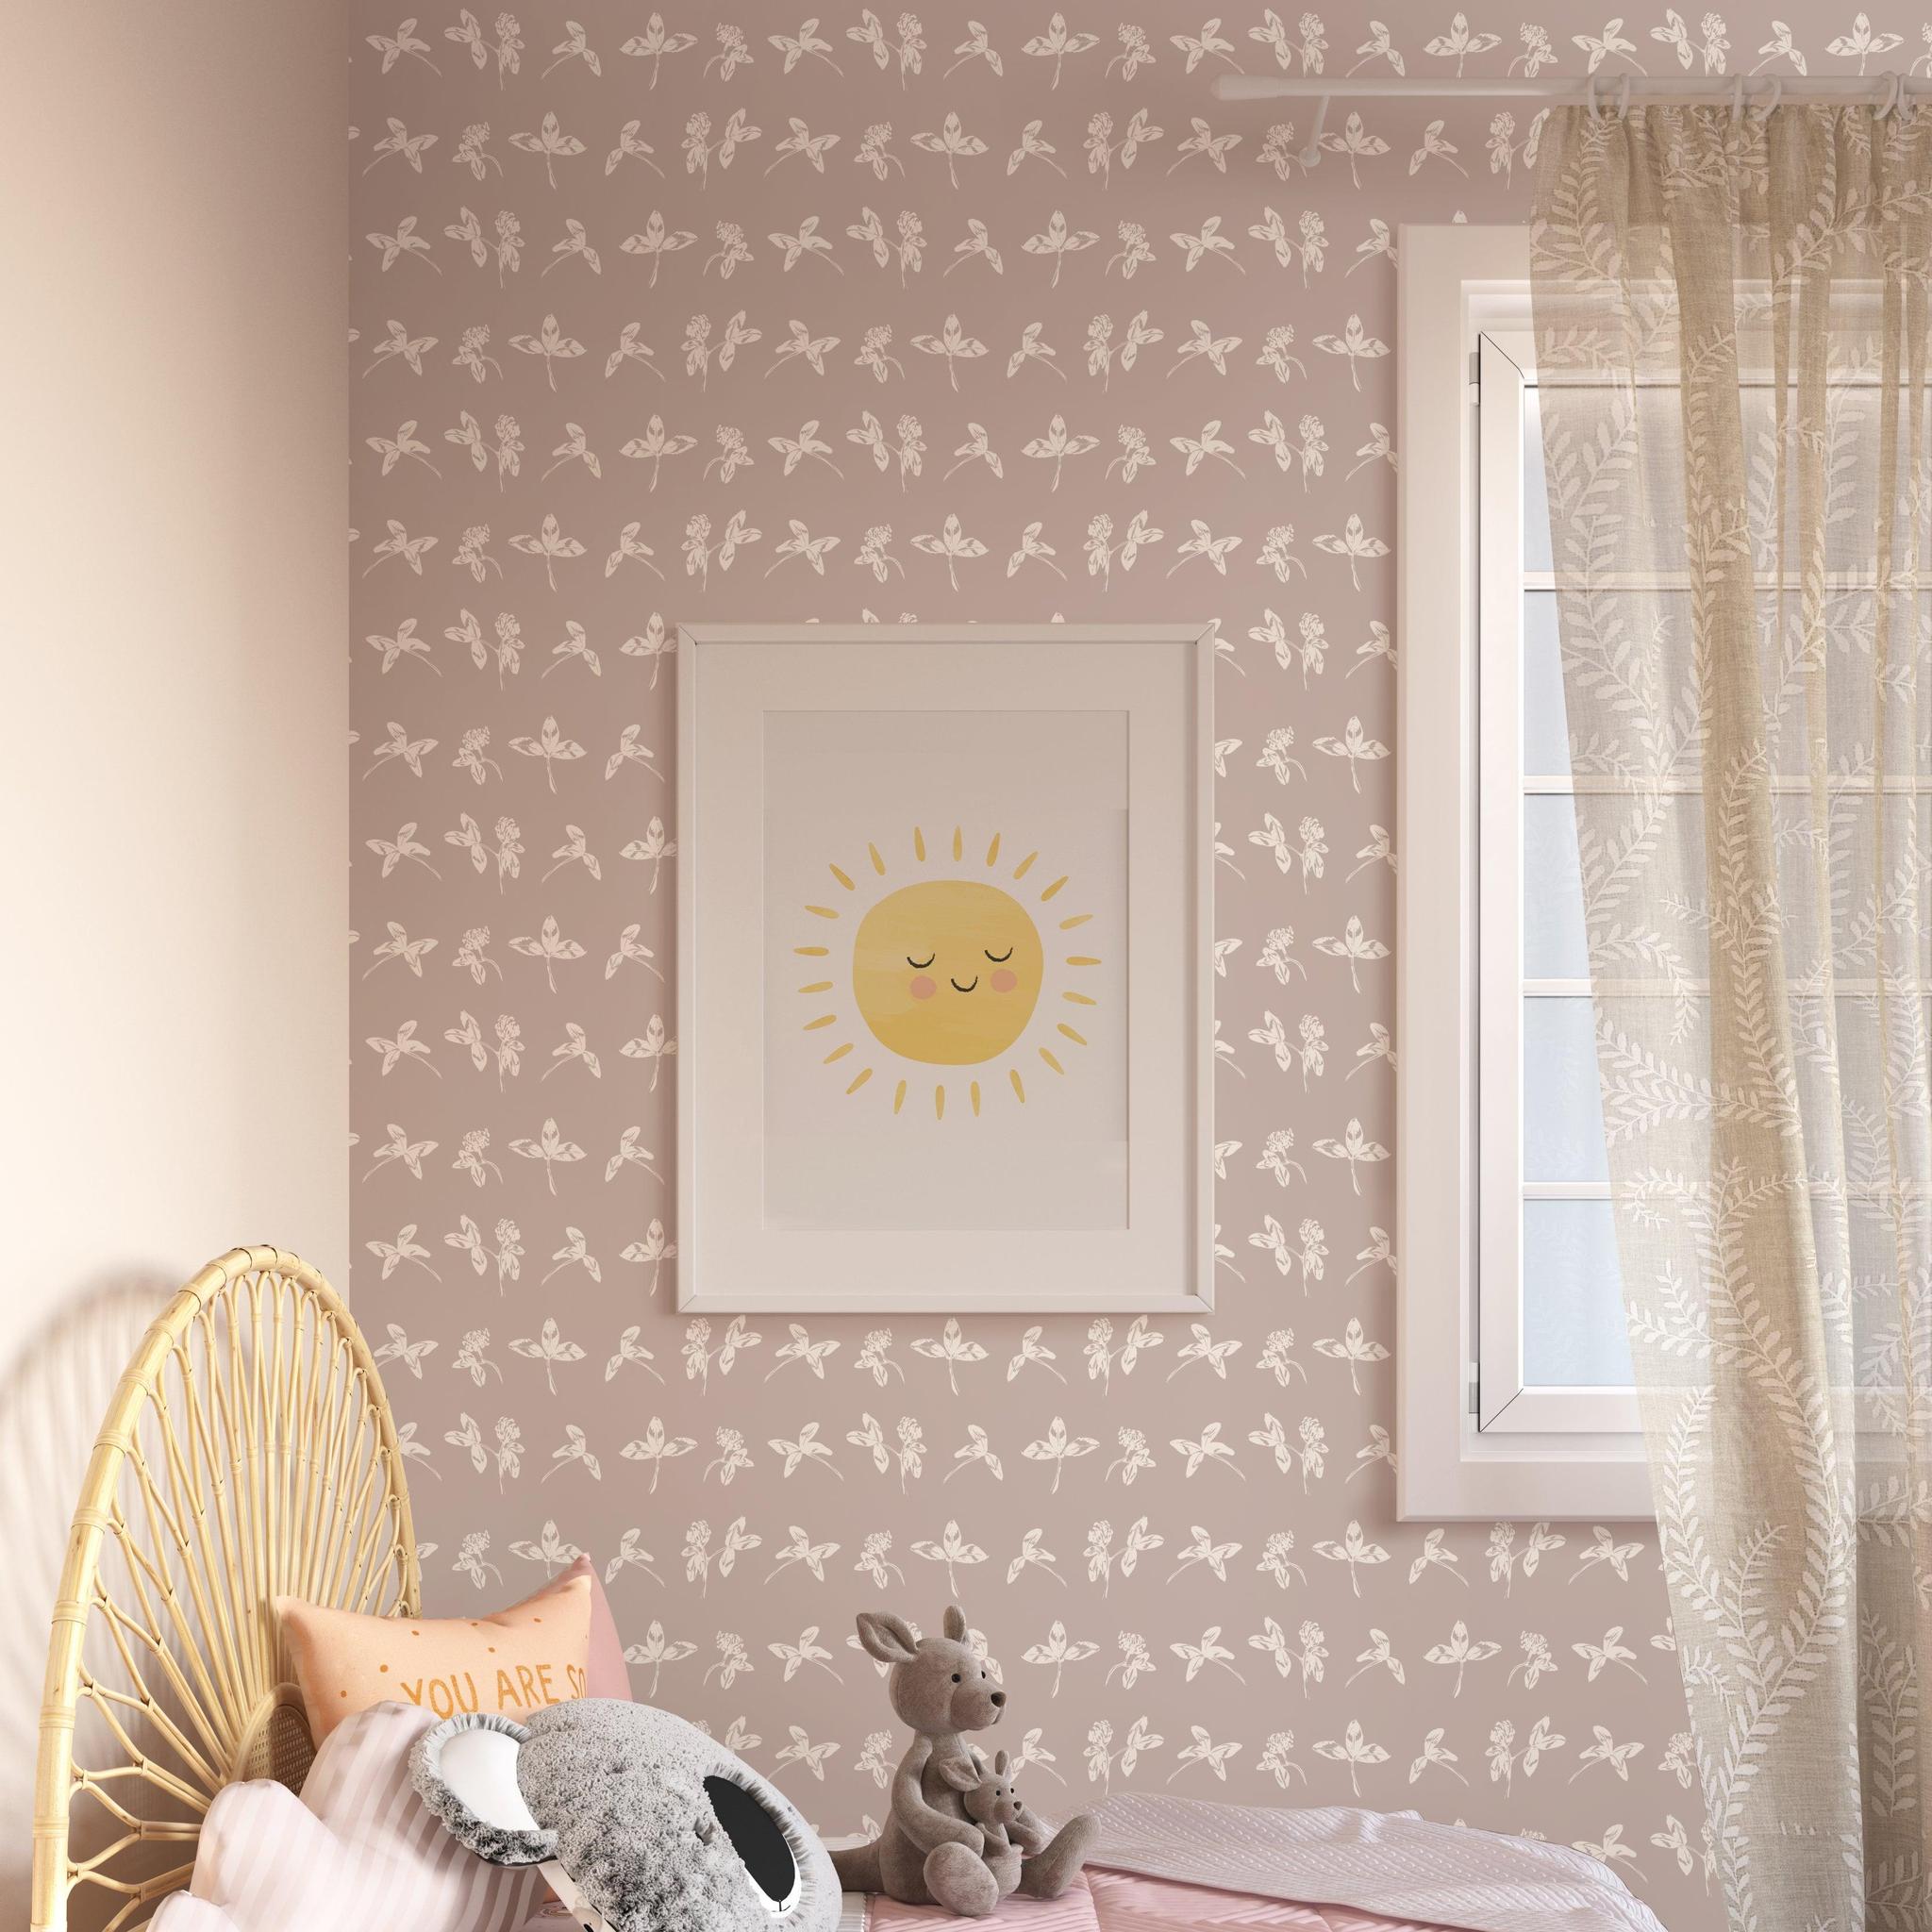 Keen & Clever Wallpaper by The Ania Zwara Line in a cozy bedroom with elegant floral patterns.
